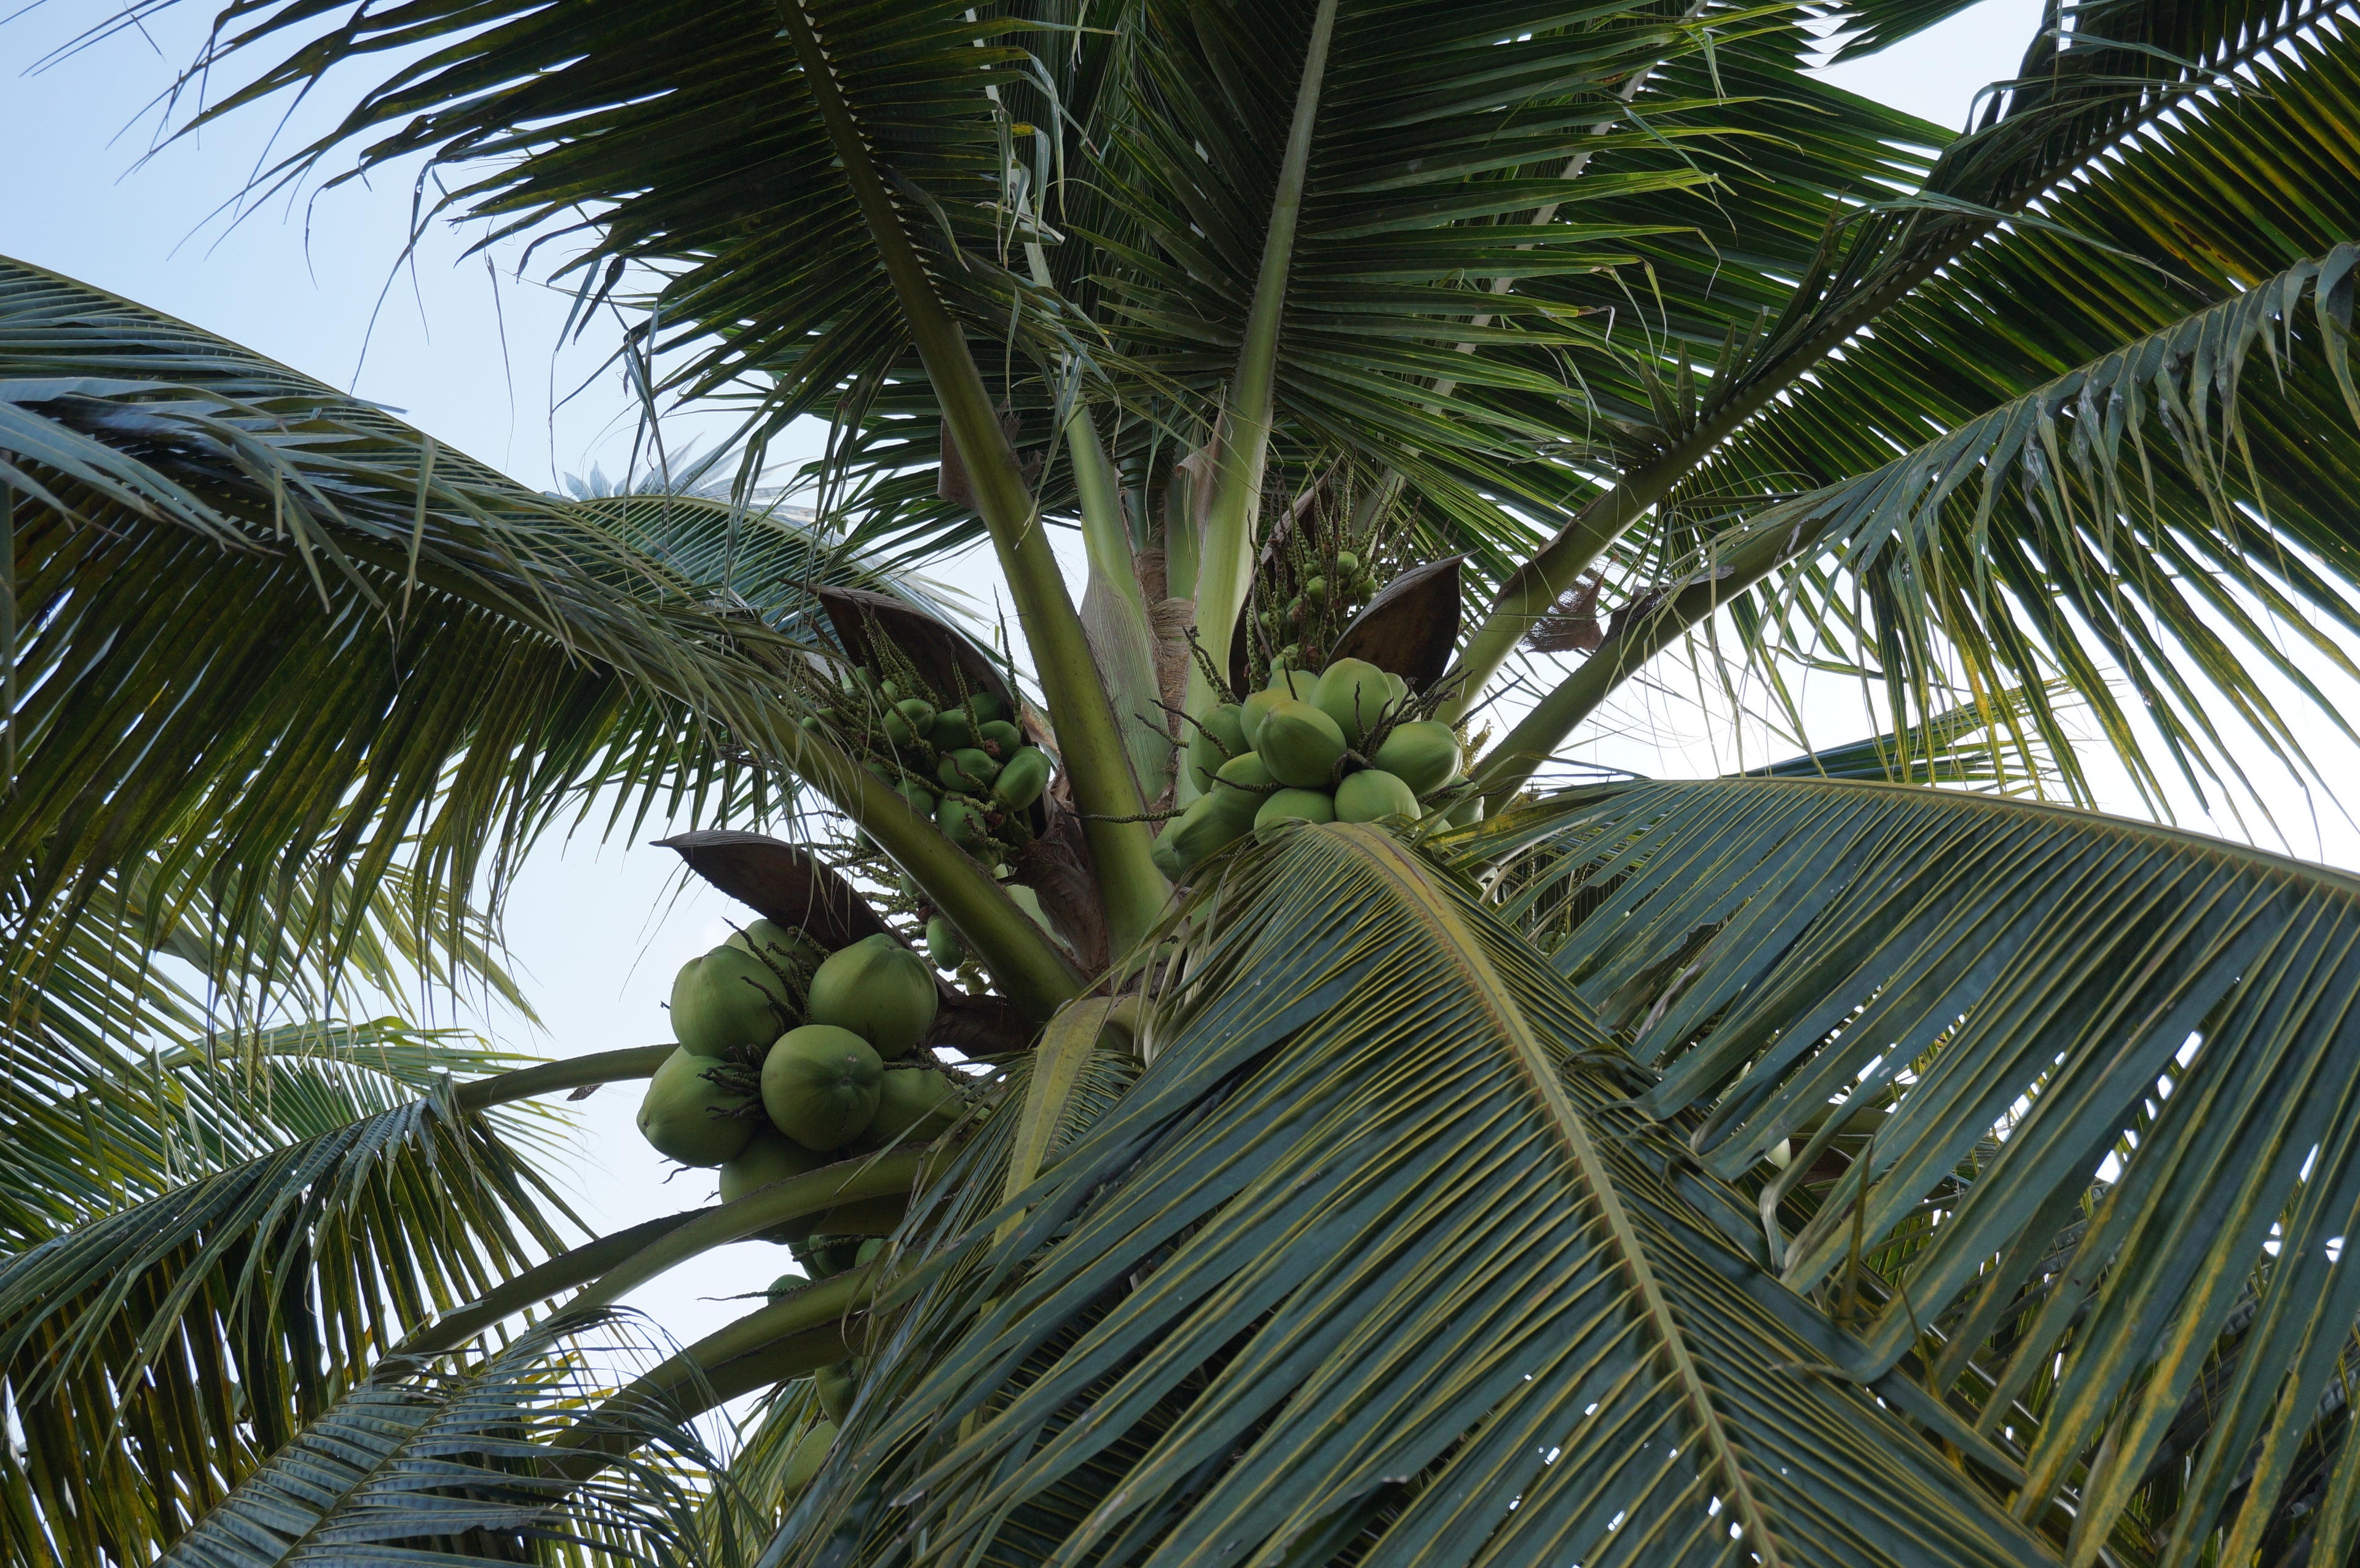 Coconut tree full of Nam Hom coconuts ready for harvest for making Copra Coconuts products.